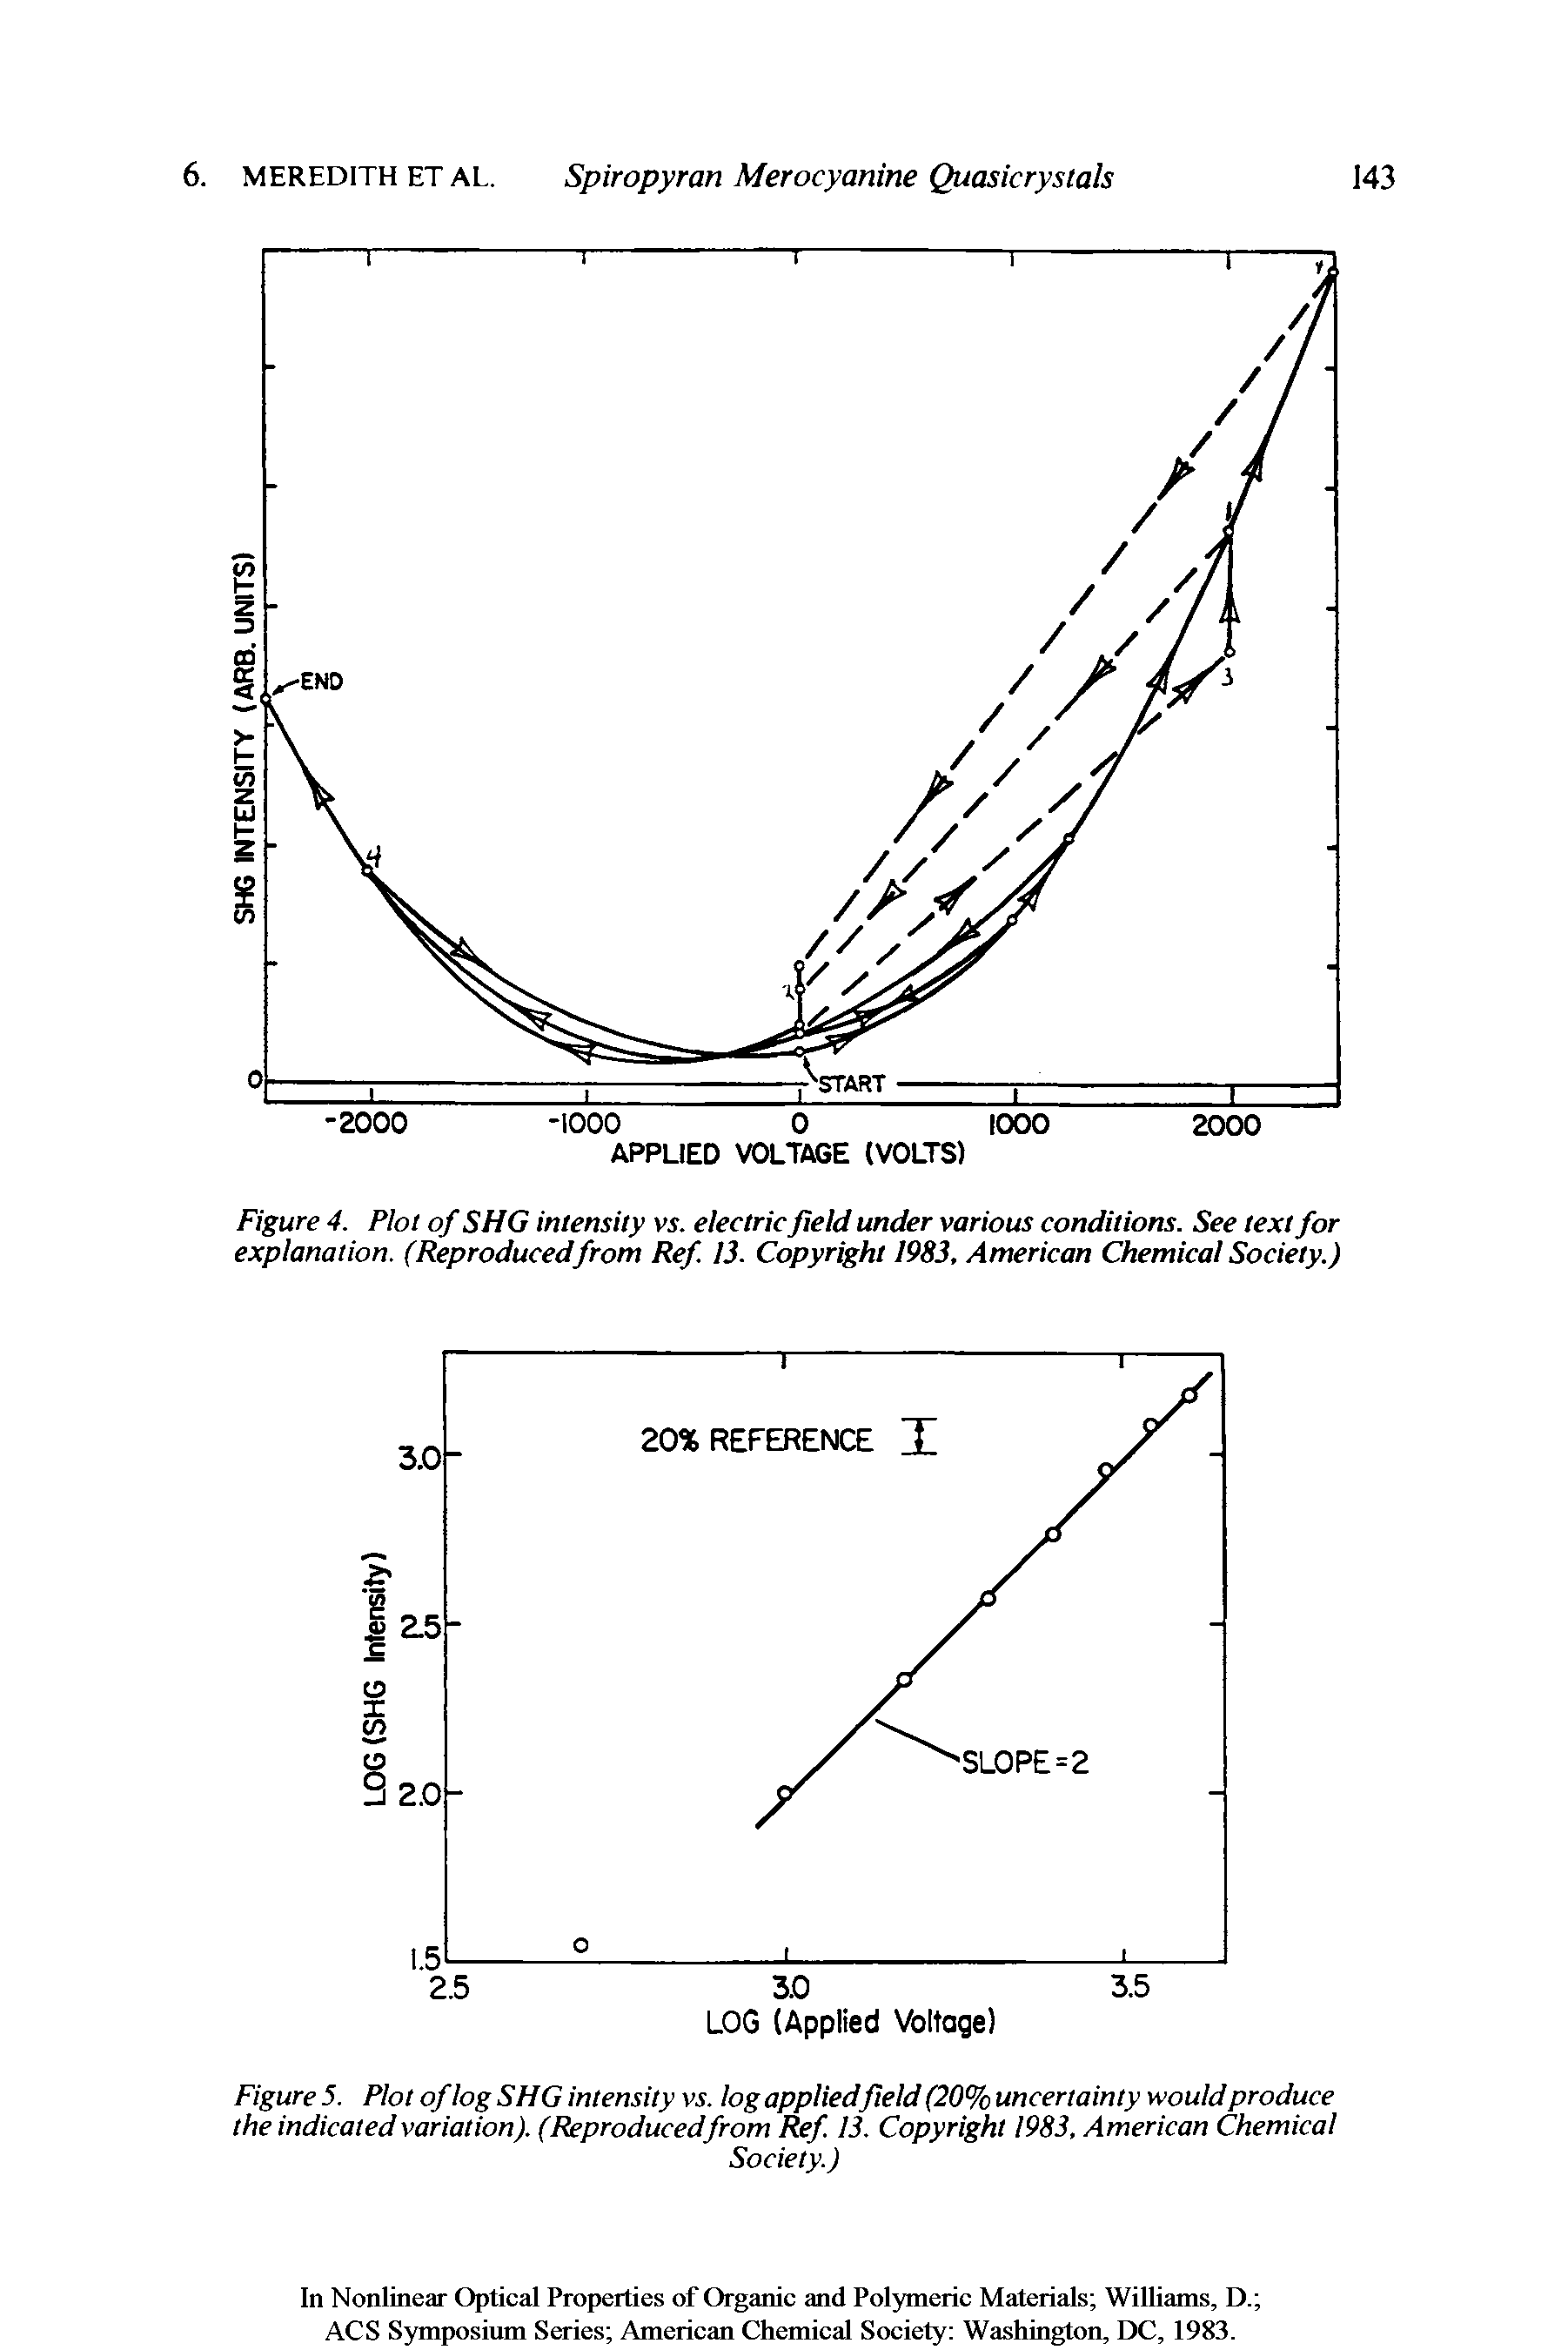 Figure 4. Plot of SHG intensity vs. electric field under various conditions. See text for explanation. (Reproducedfrom Ref. 13. Copyright 1983, American Chemical Society.)...